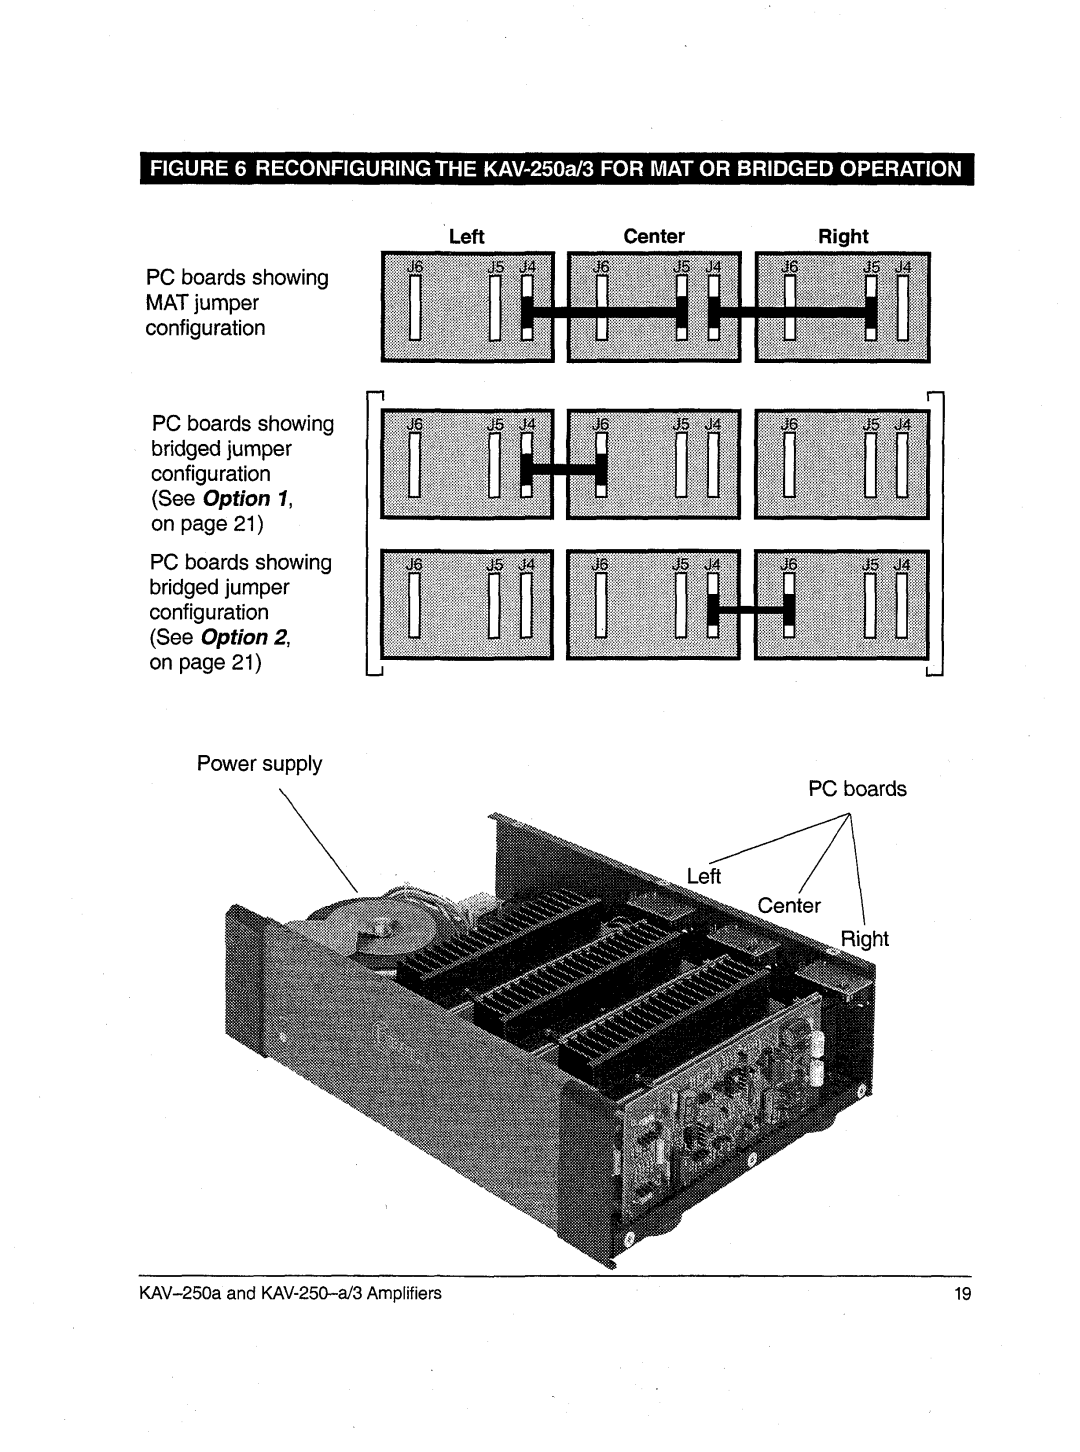 Krell Industries KAV-250a/3 manual LeftCenterRight, PCboards showing MATjumper configuration, on page21 Powersupply 